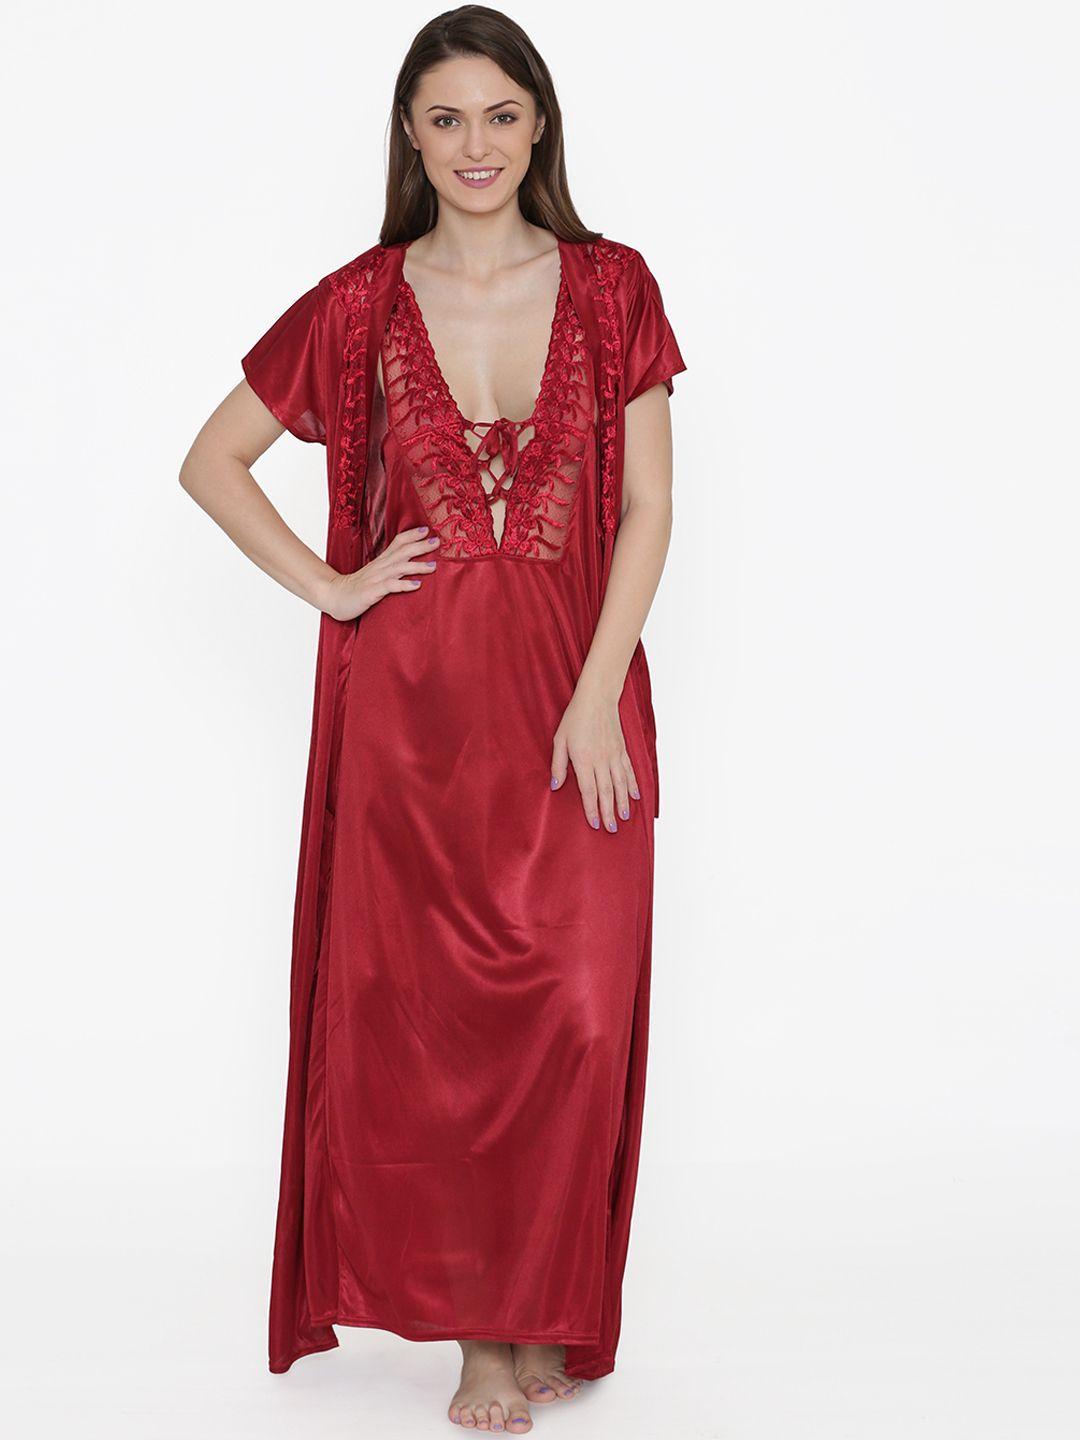 n-gal maroon embroidered lace bridal nightdress with robe